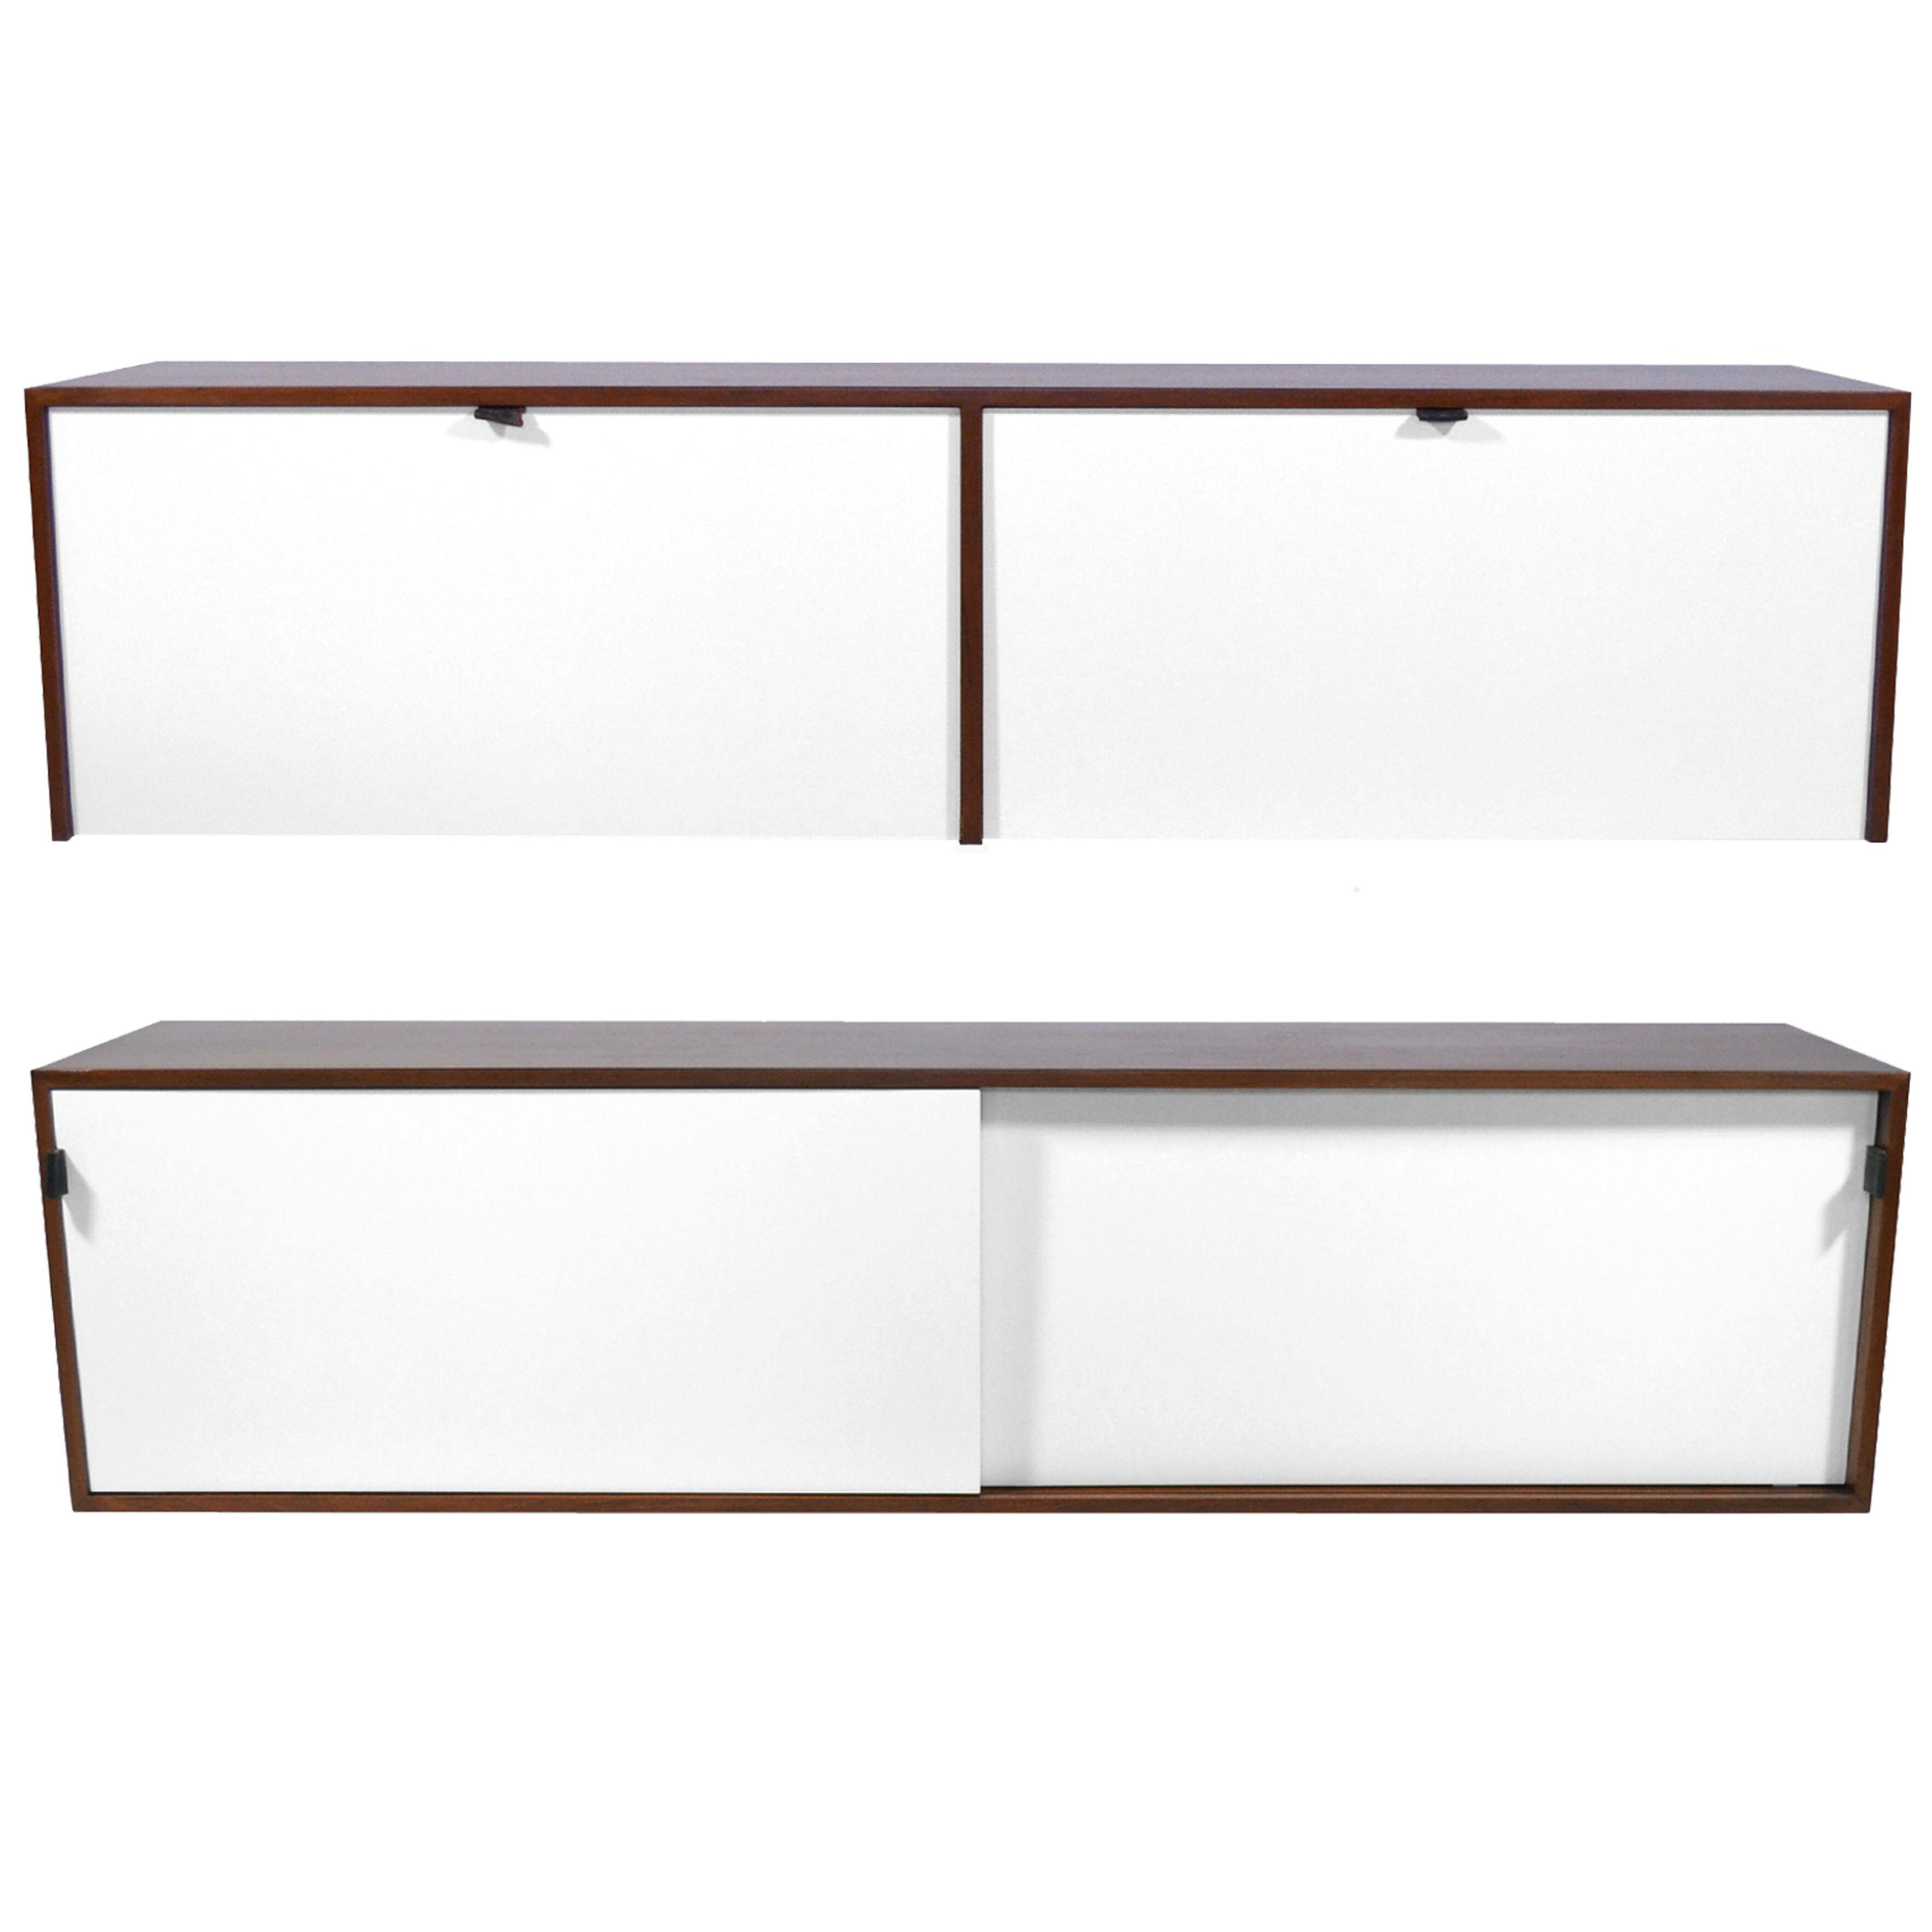 Florence Knoll Walnut Wall Mounted Credenzas or Cabinets